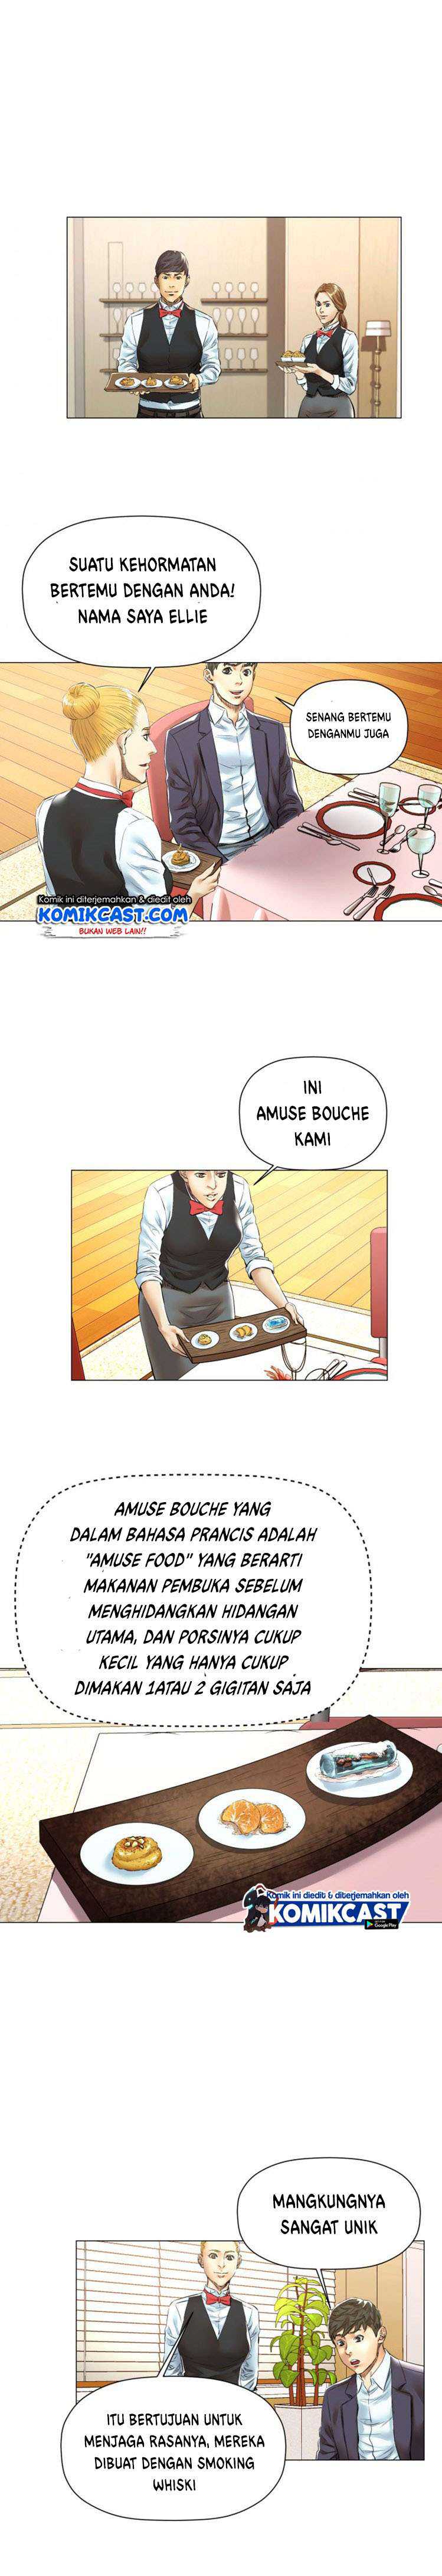 God of Cooking Chapter 29